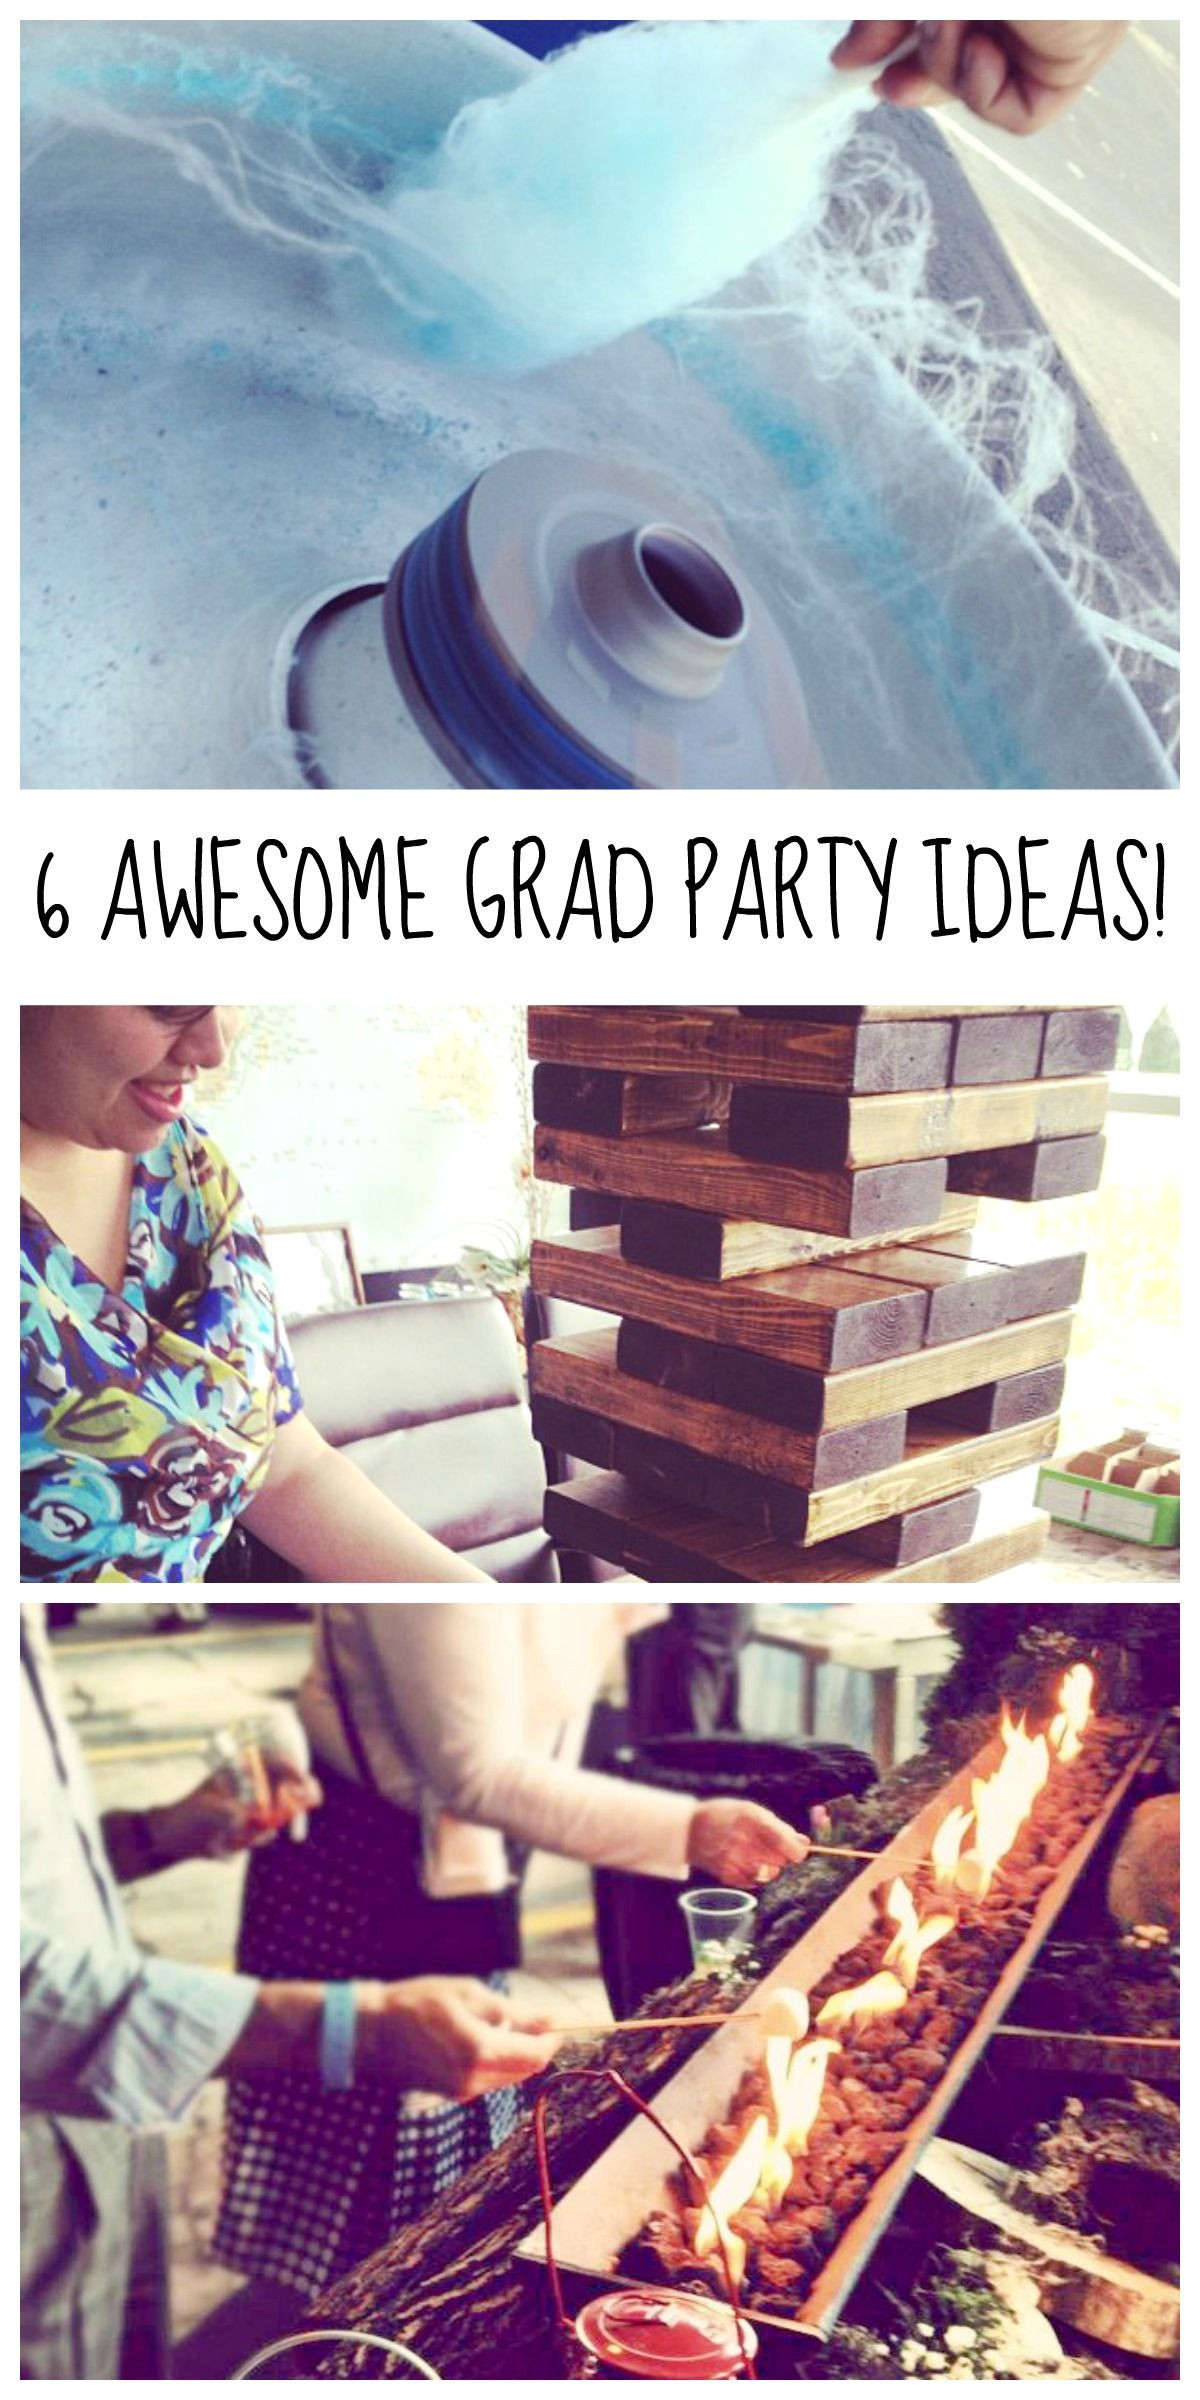 Game Ideas For Graduation Party
 Pin on Graduation Parties